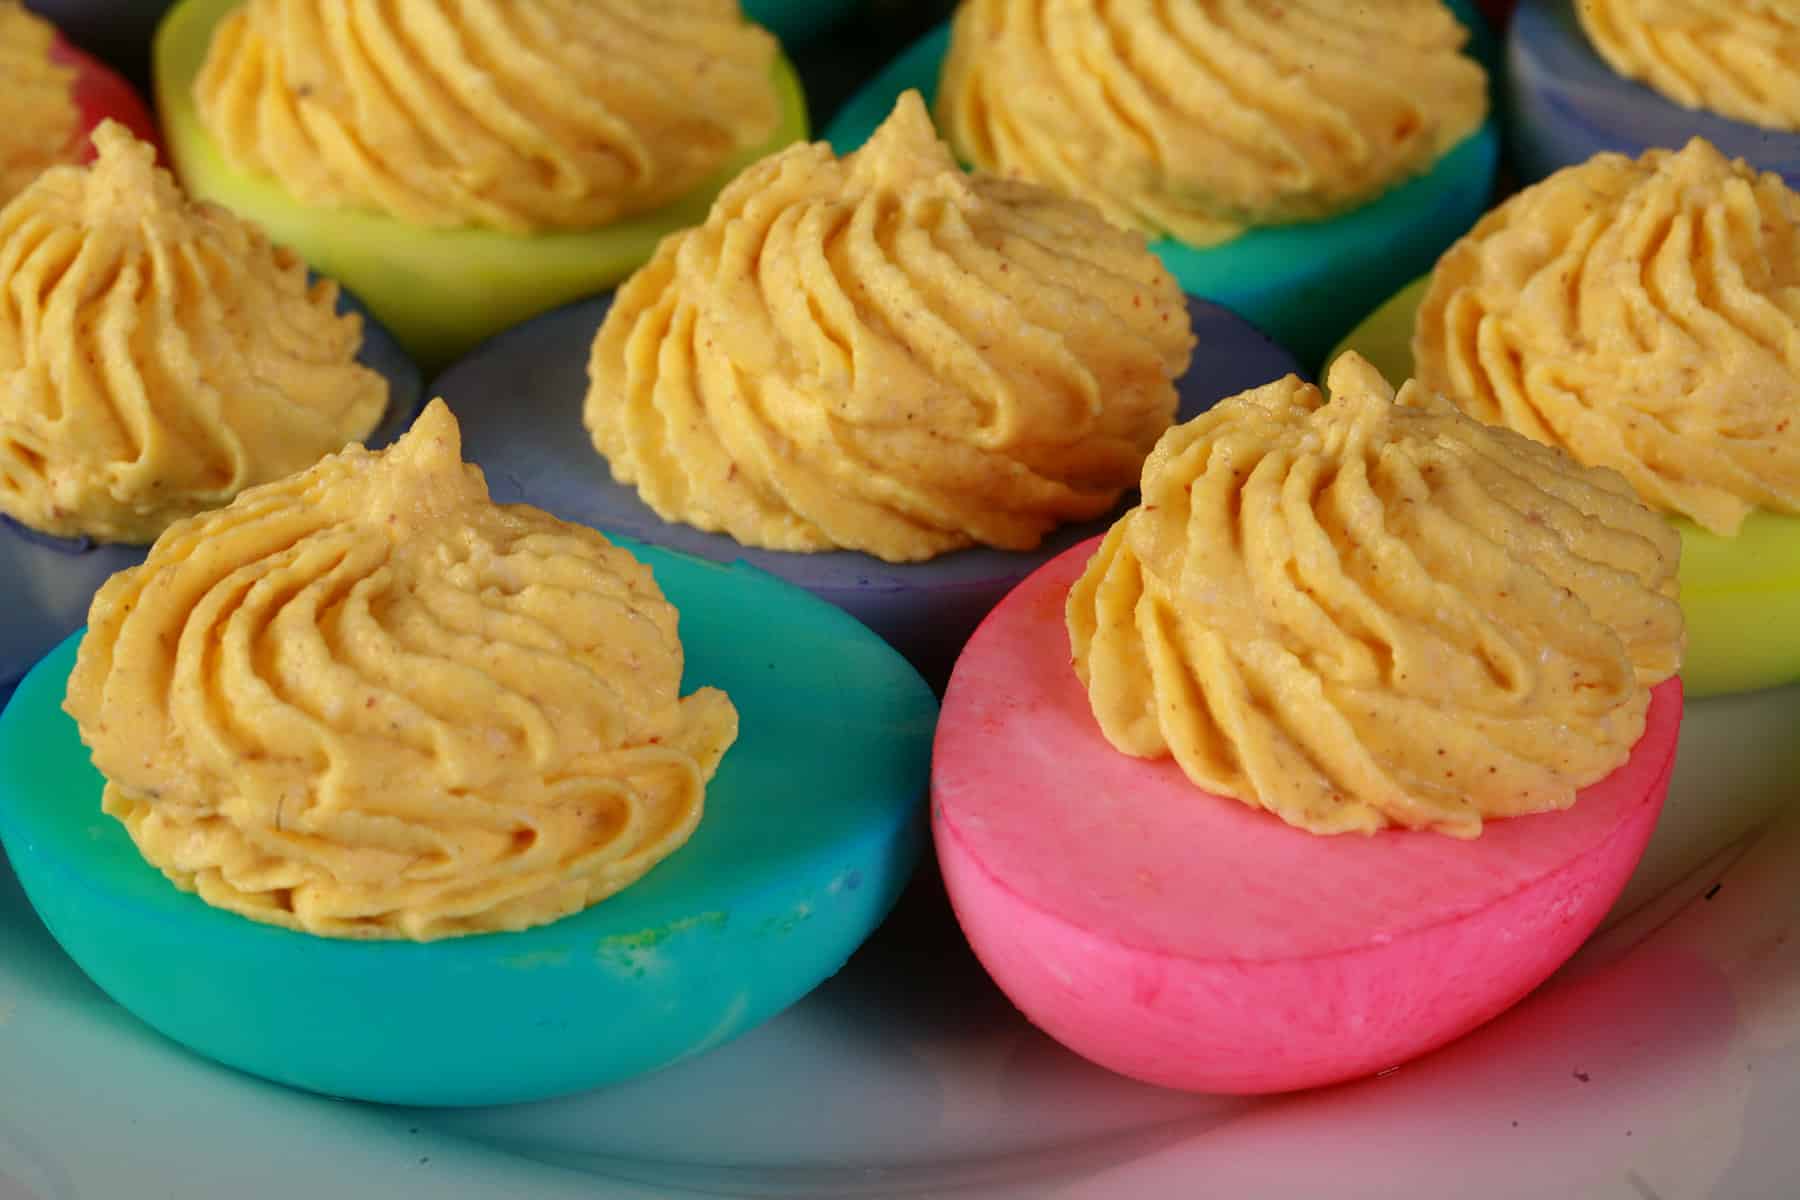 A serving plate of colored deviled eggs, where the whites have been dyed hot pink, lime green, turquoise, and light purple.